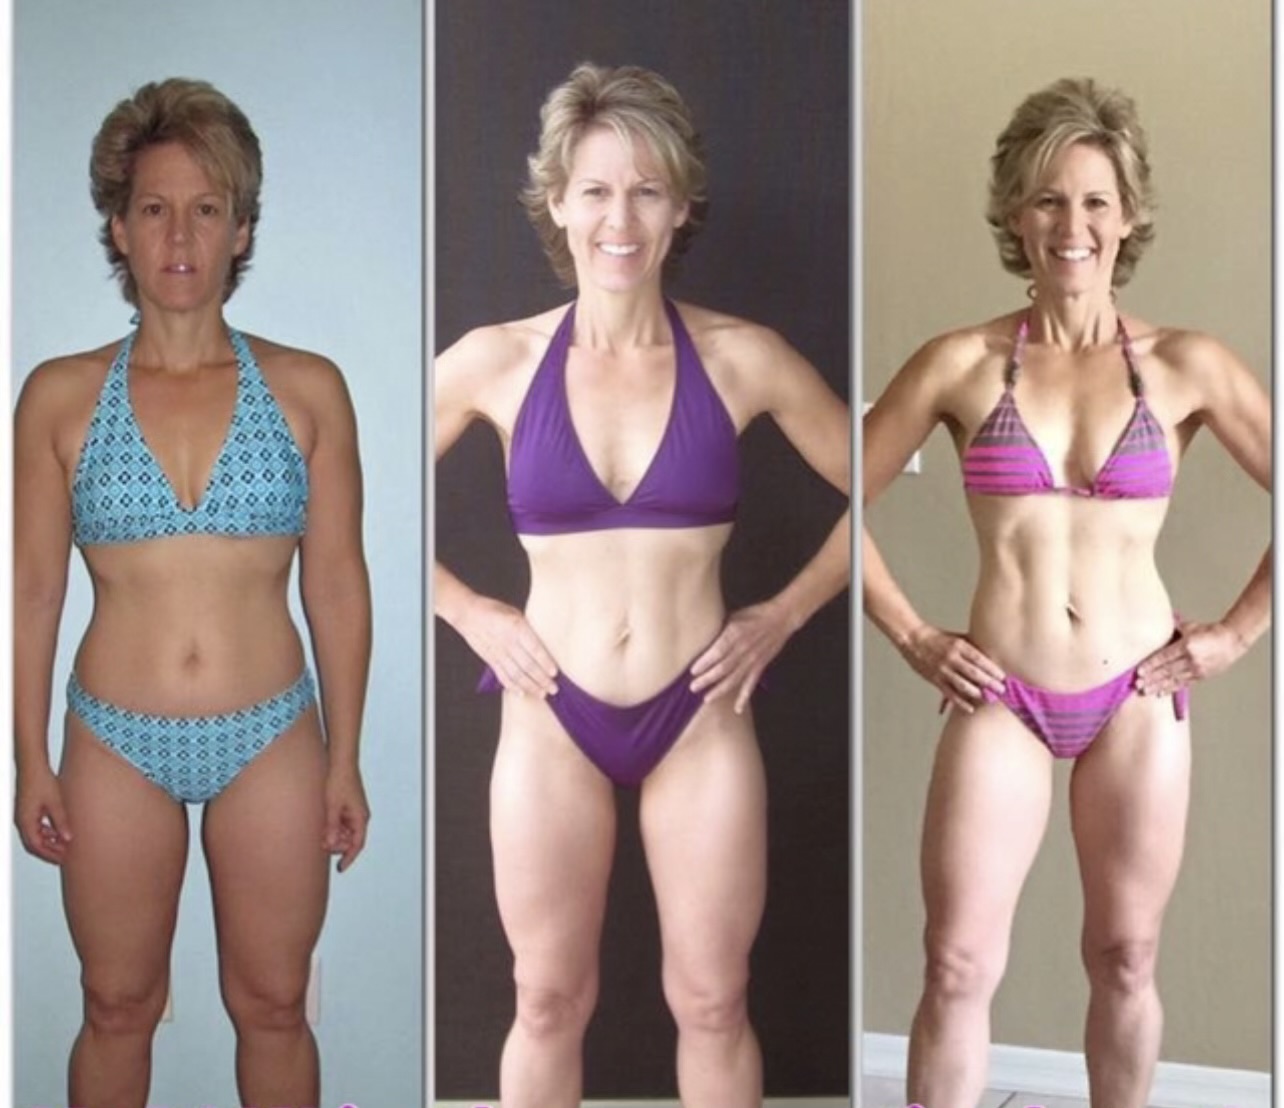 Woman's fitness progress in three stages, front view.